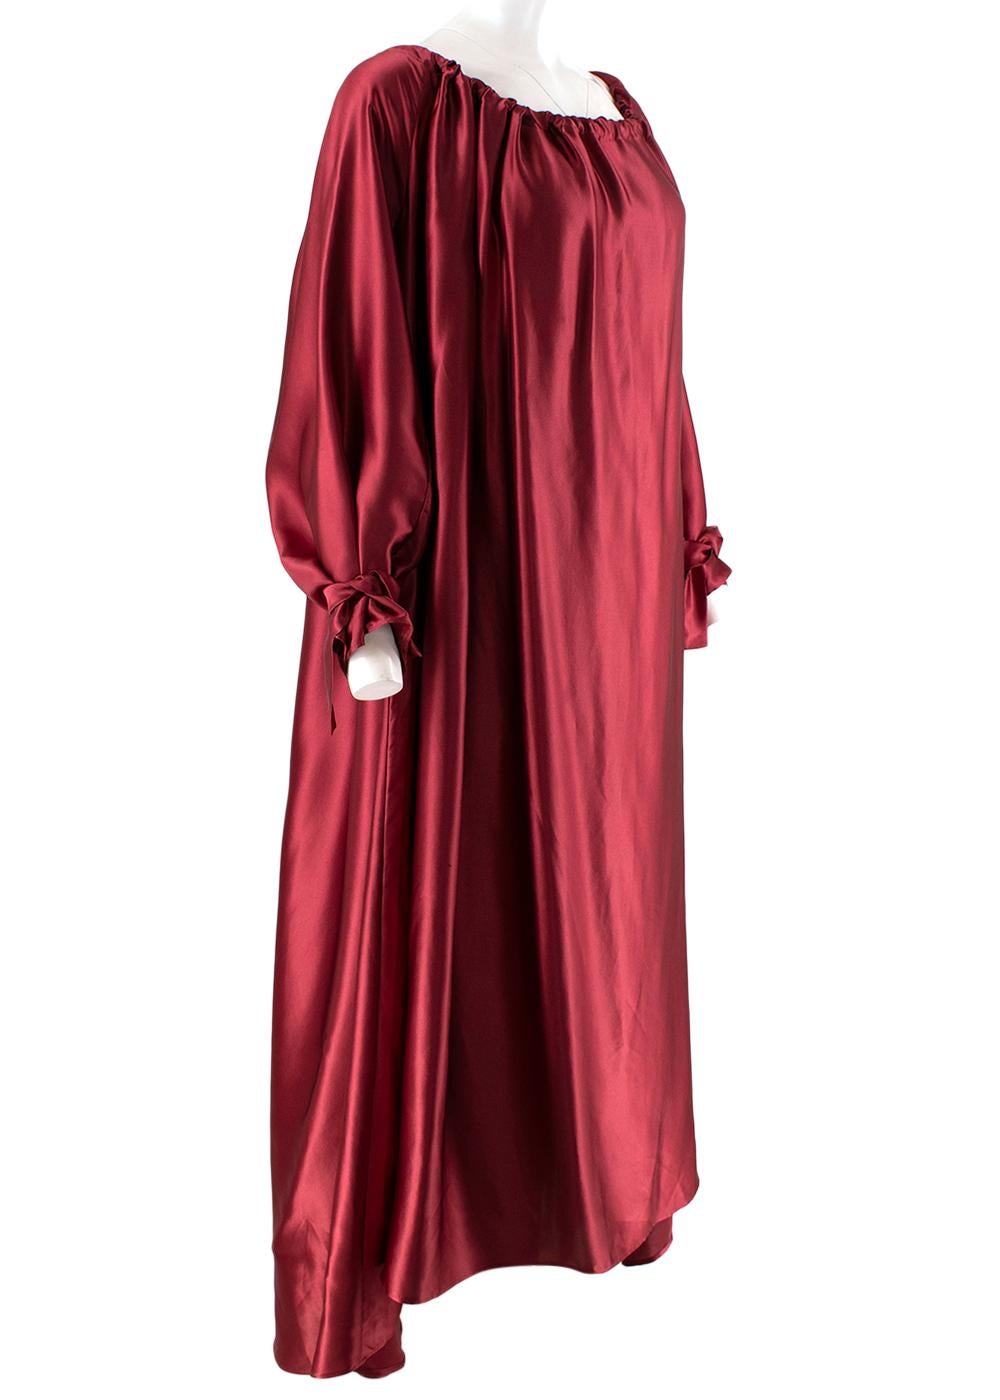 Henriette Von Gruenberg Bettina Silk Satin Low Back Draped Gown 

- A collaboration between contemporary silks brand Henriette Von Gruenberg, and stylist Bettina Looney
- 4.5m of silk satin in used to create a voluminous style, with gathered low